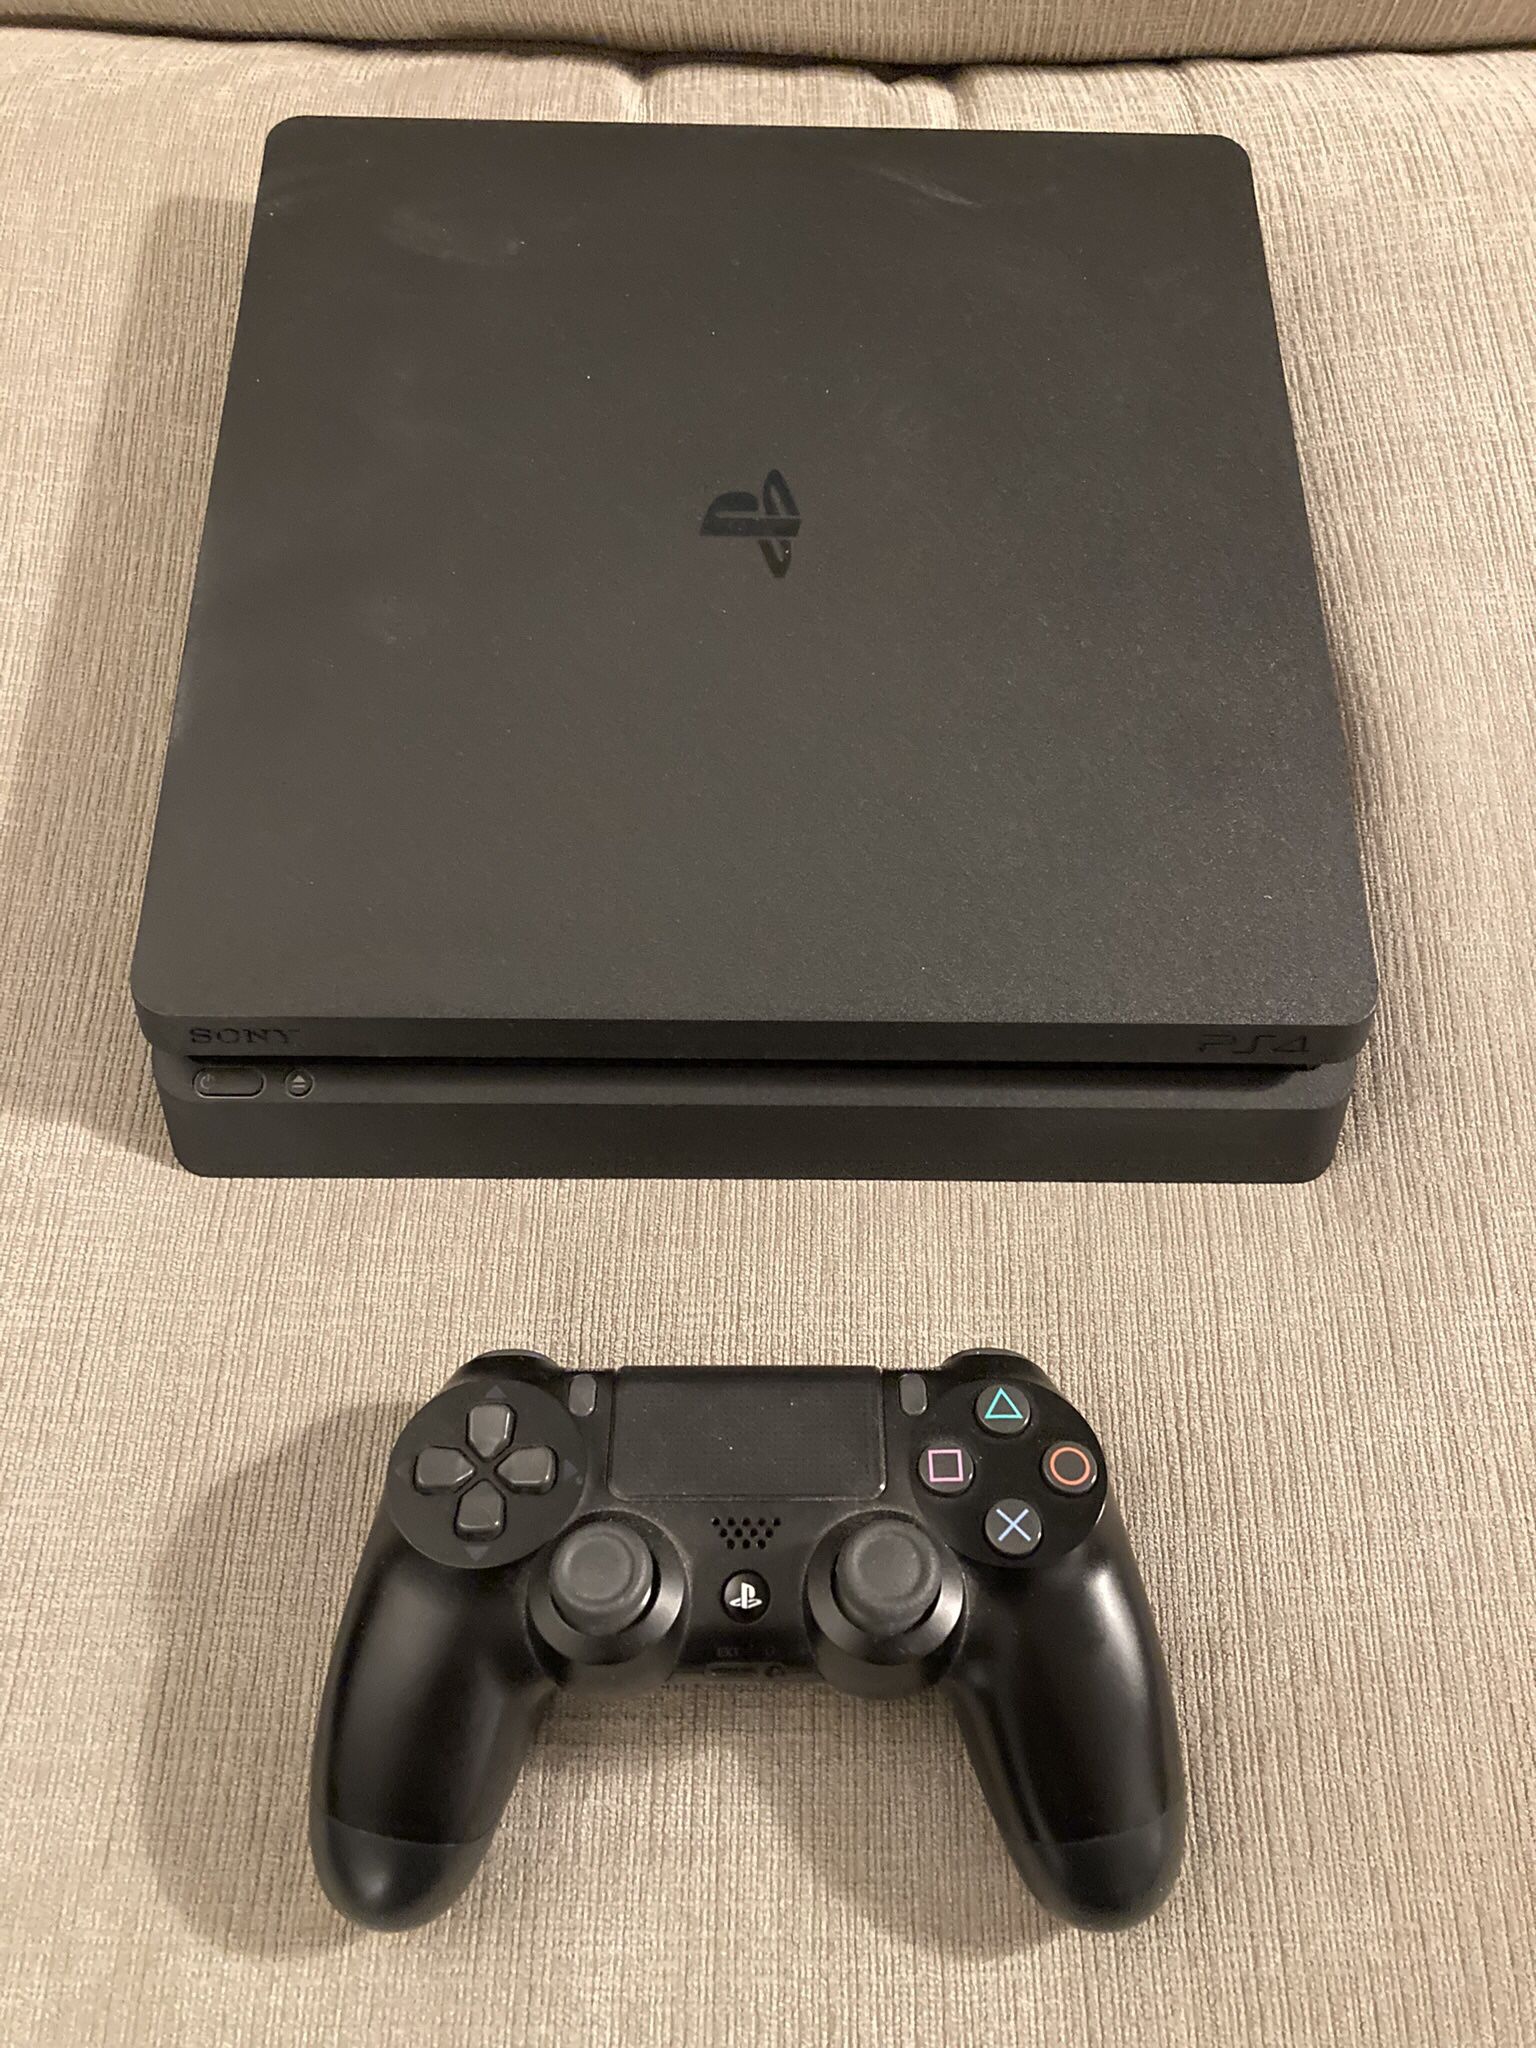 PlayStation 4 Slim 1 TB, Comes With Wireless Headphones And Controller